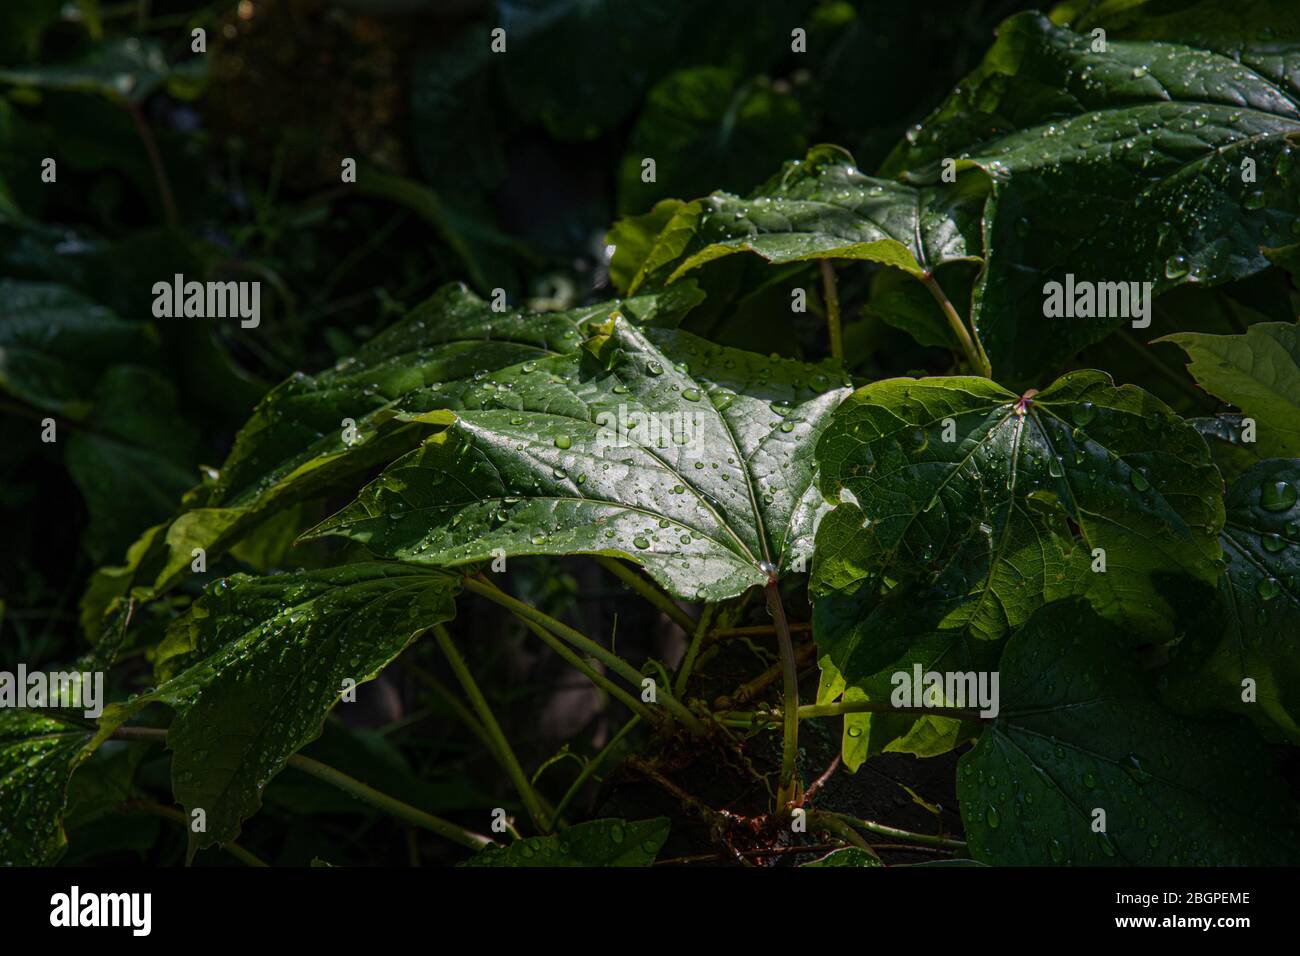 Closeup of ivy climbing plant foliage with water drops on leaves. Wet green leaf texture for background. Beauty of nature after rain. Stock Photo